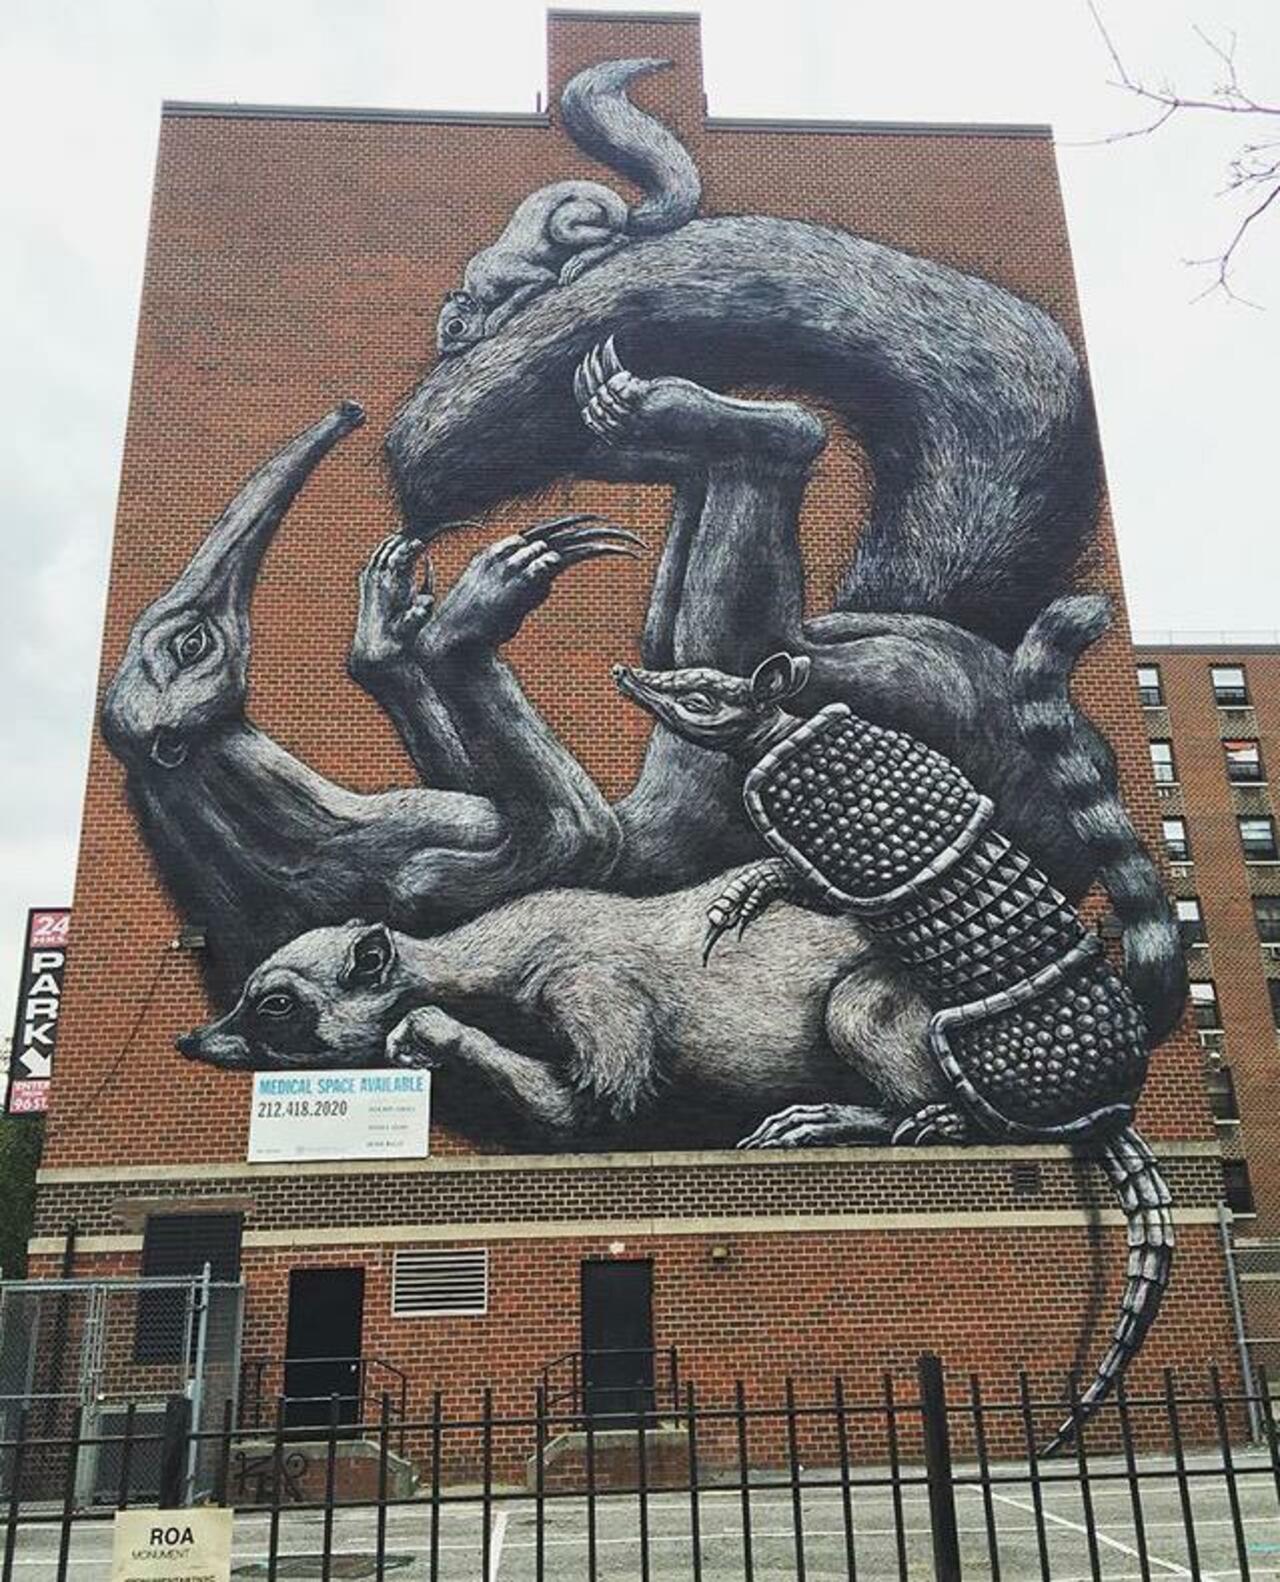 The completed new large scale Street Art wall by ROA in NYC

#art #graffiti #mural #streetart http://t.co/eosNhryYWo